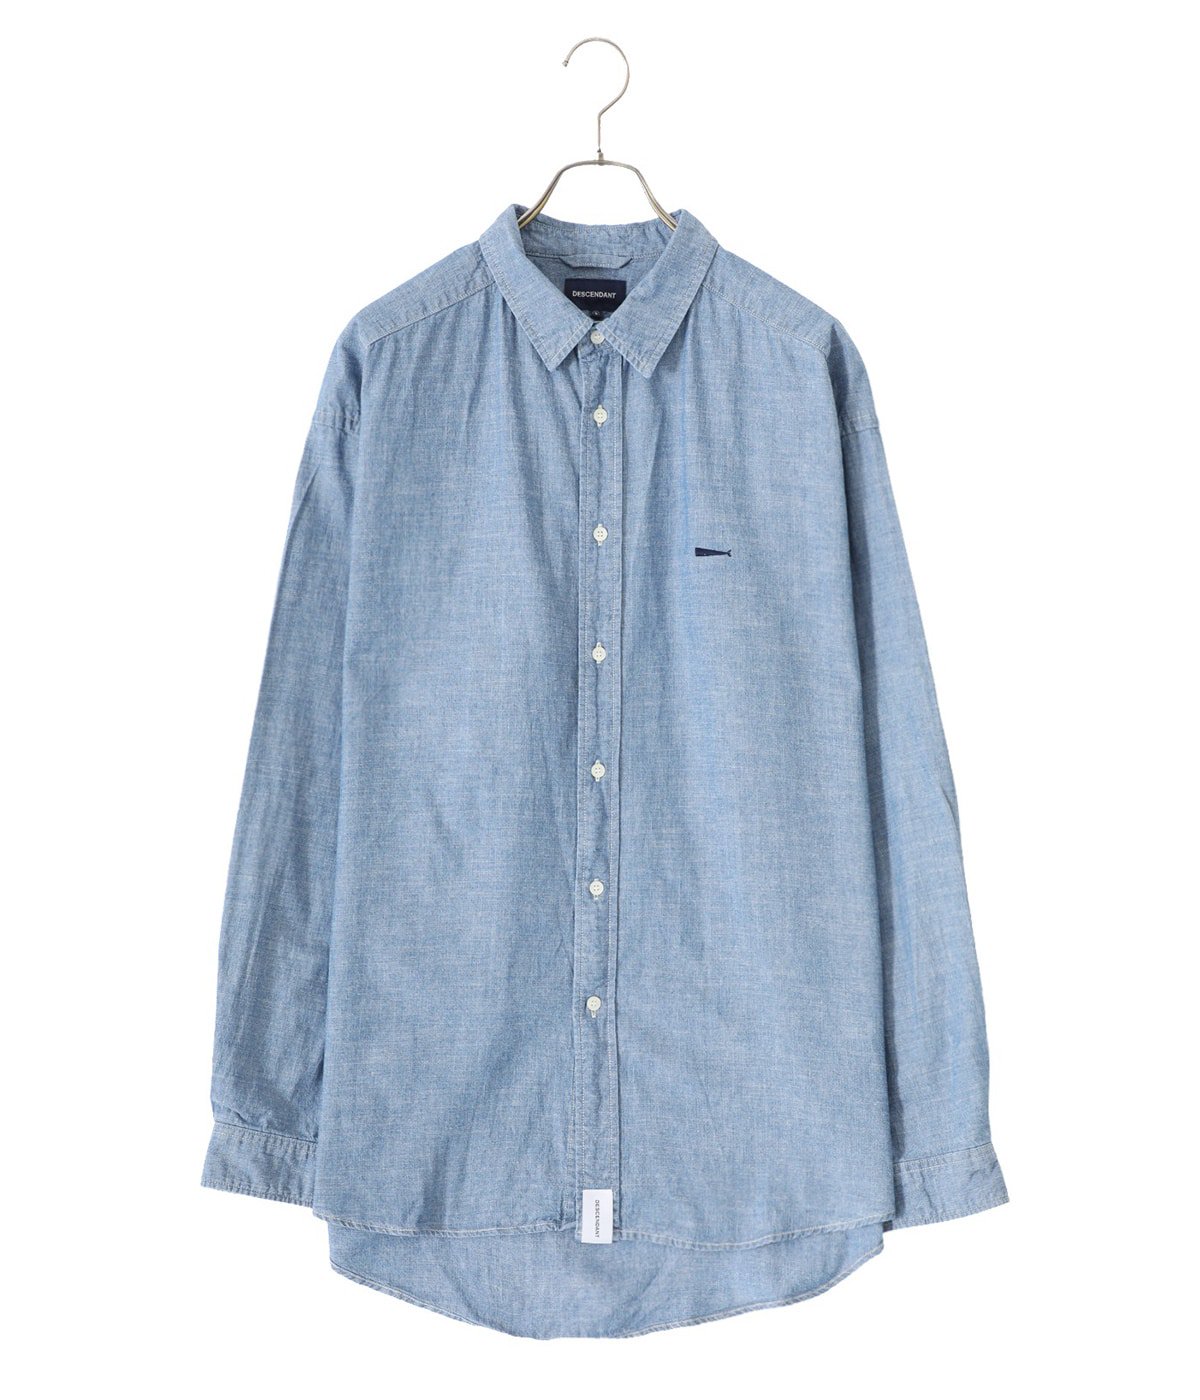 KENNEDY'S CHAMBRAY LS SHIRT | DESCENDANT(ディセンダント